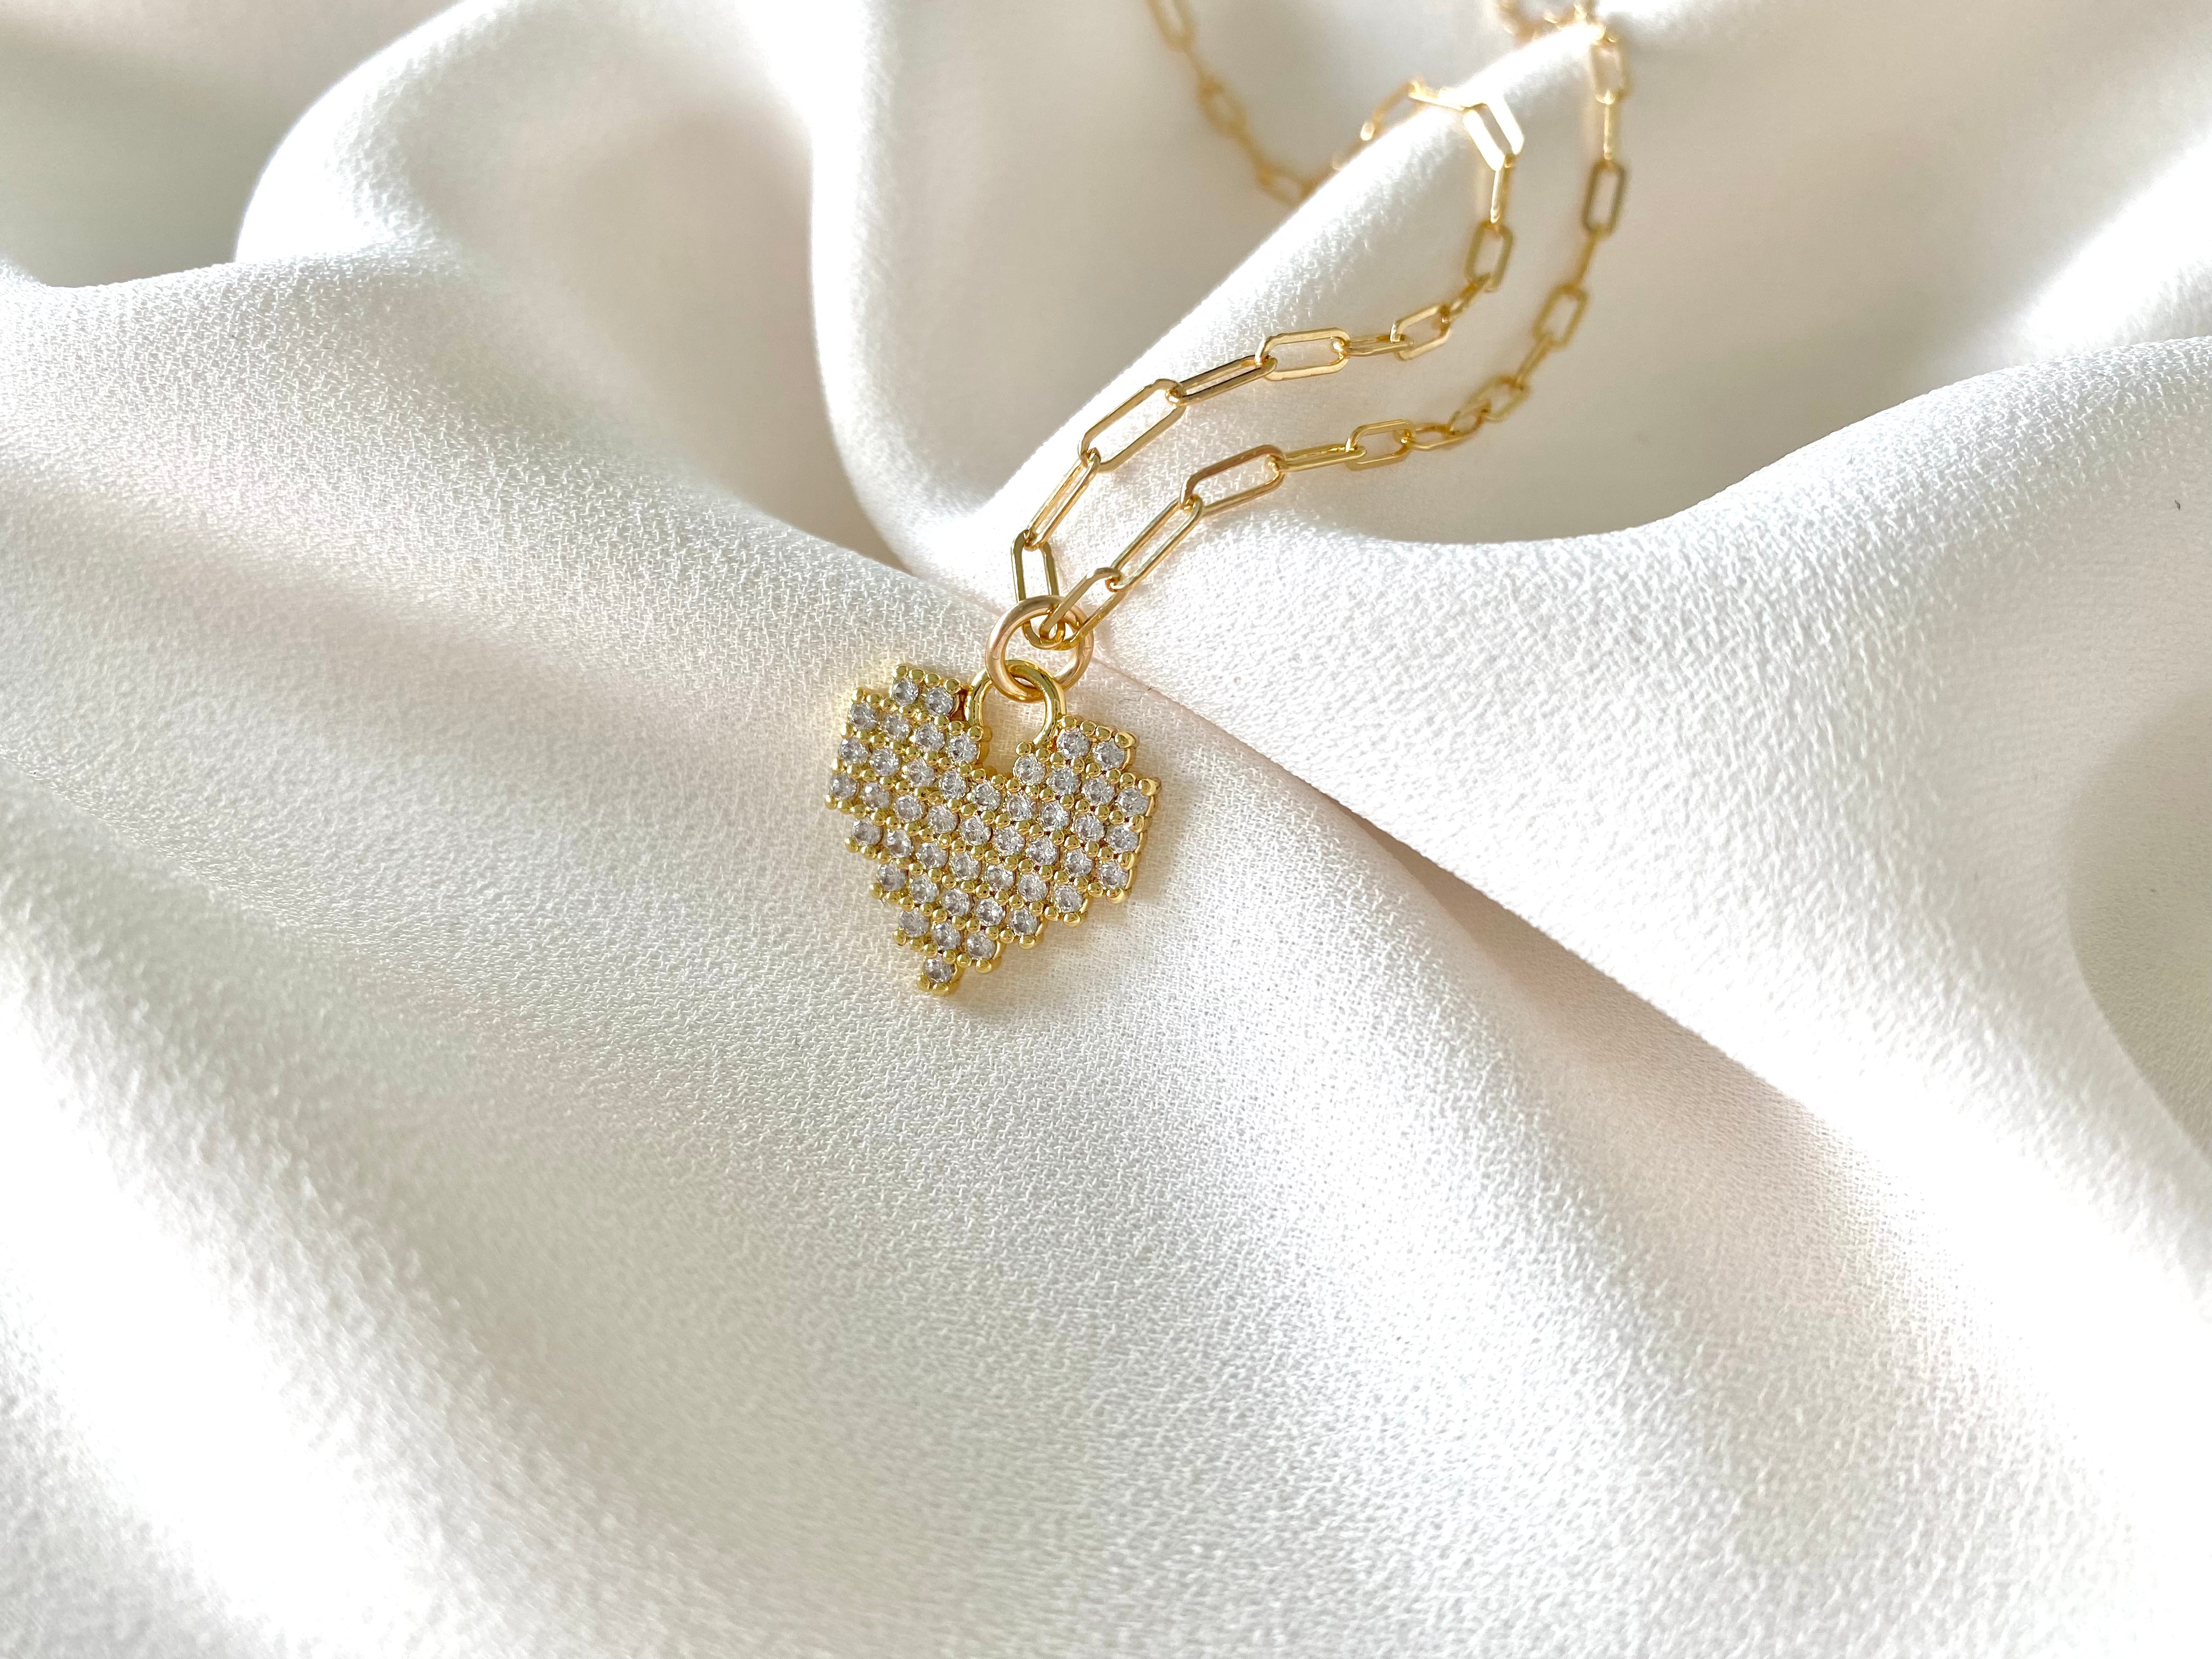 Gold Dainty Micro Pave Heart Pendant Necklace - Gold Filled Paperclip Chain - Pixel Heart